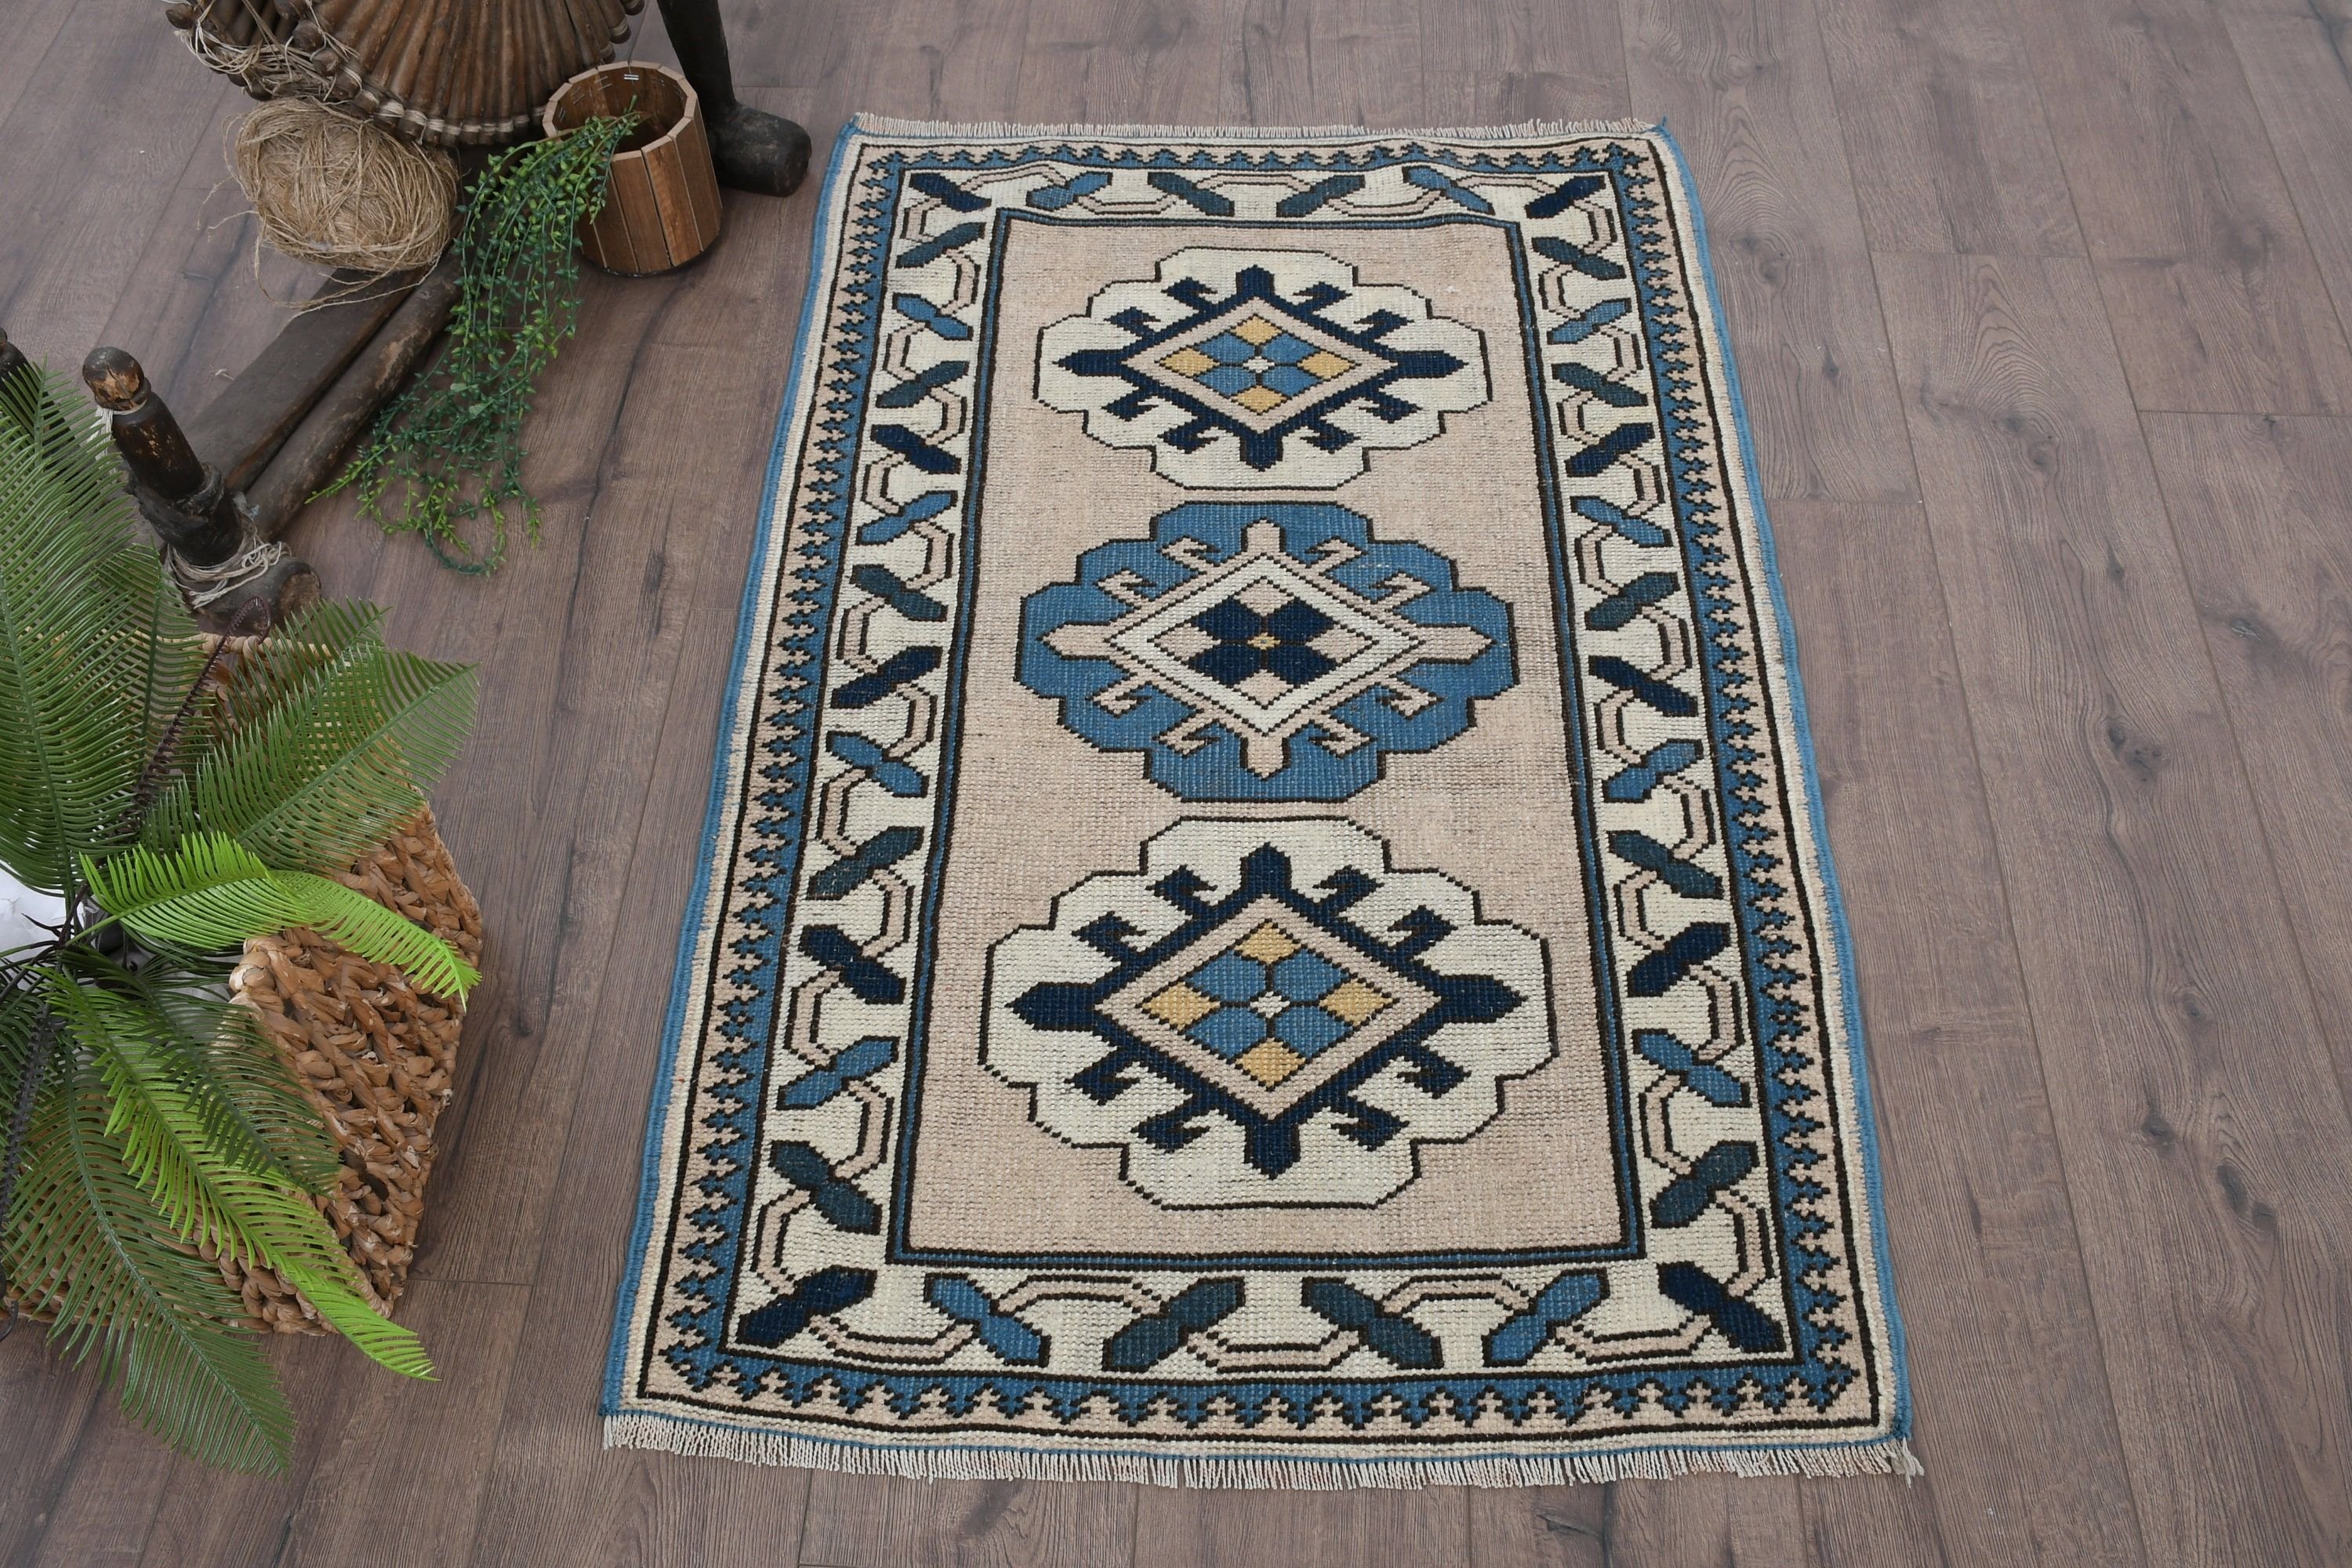 Wool Rug, Vintage Rugs, Entry Rug, Rugs for Wall Hanging, Blue Antique Rug, Turkish Rug, Bedroom Rug, 2.6x4 ft Small Rugs